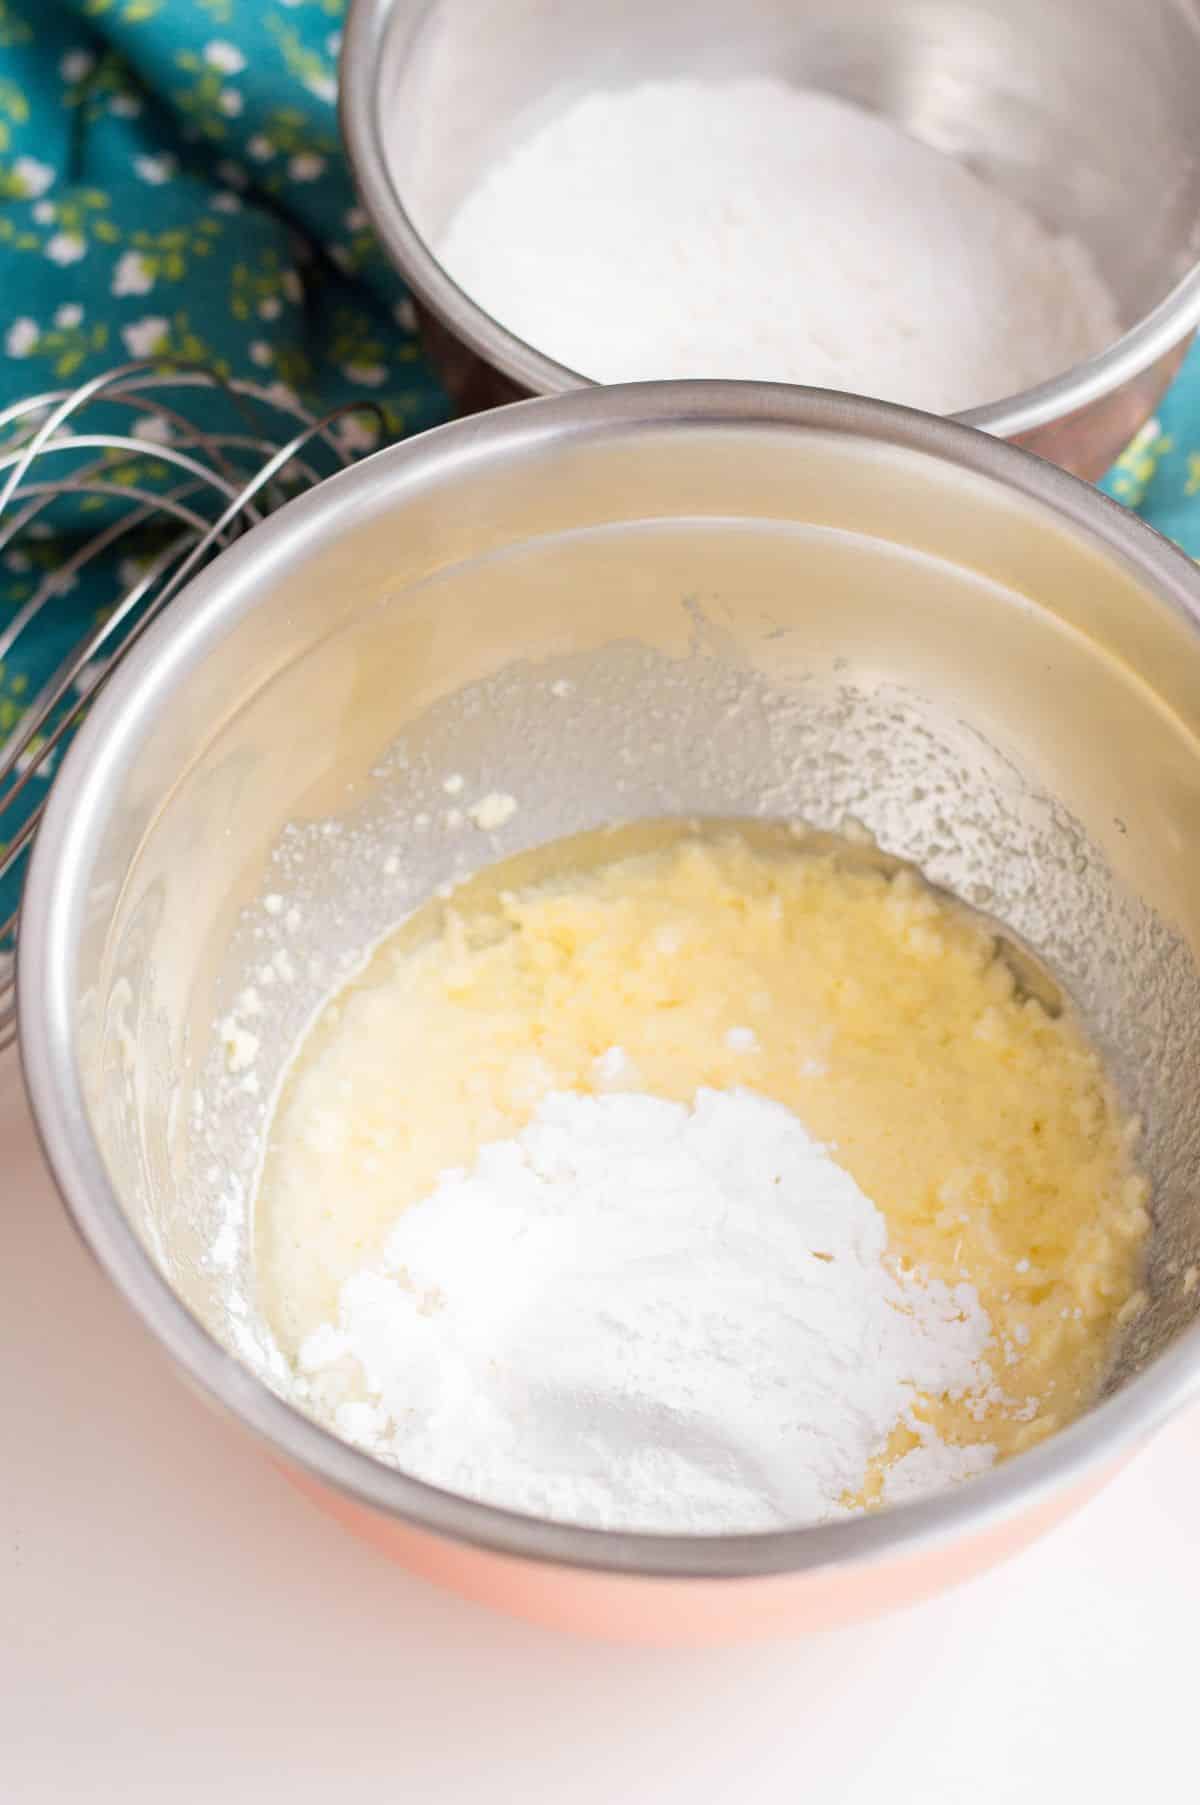 powdered sugar, oil, lemon juice and zest are added to the egg mixture.